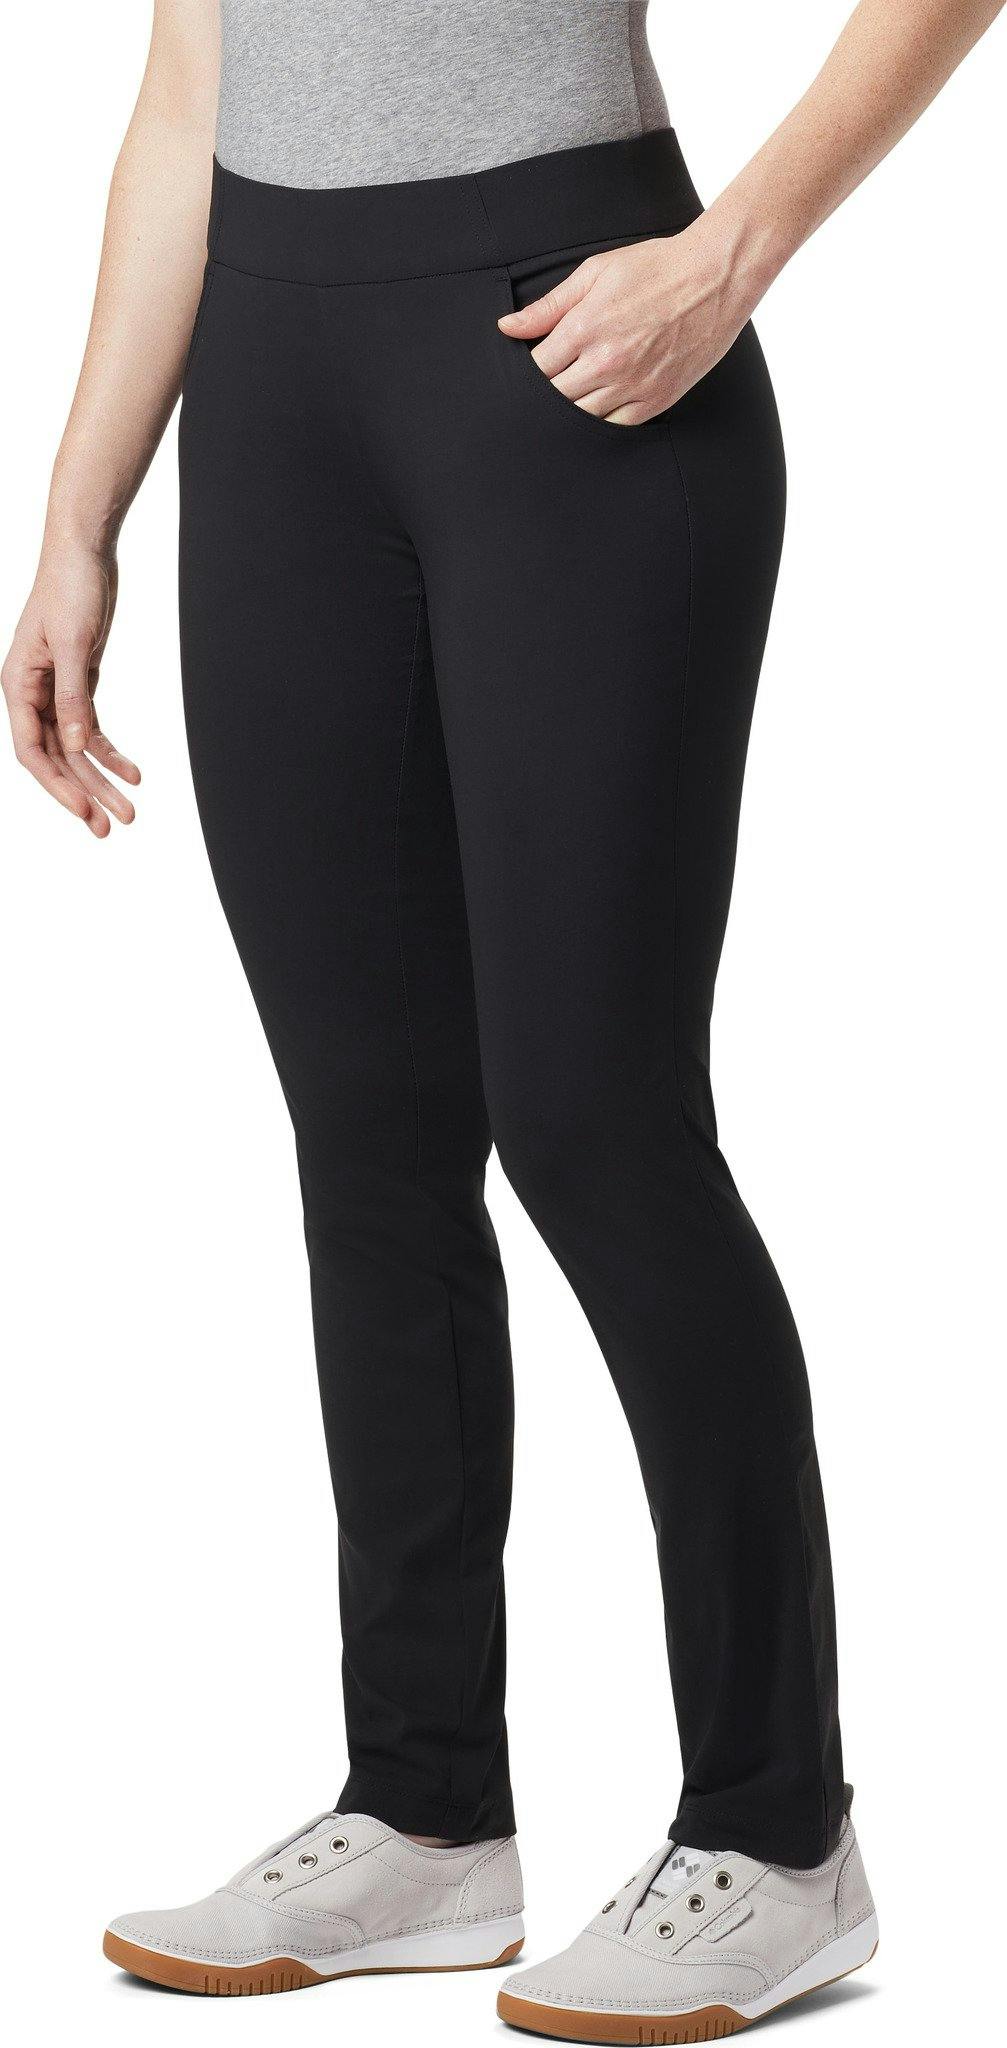 Product image for Anytime Casual Pull On Pant - Women's